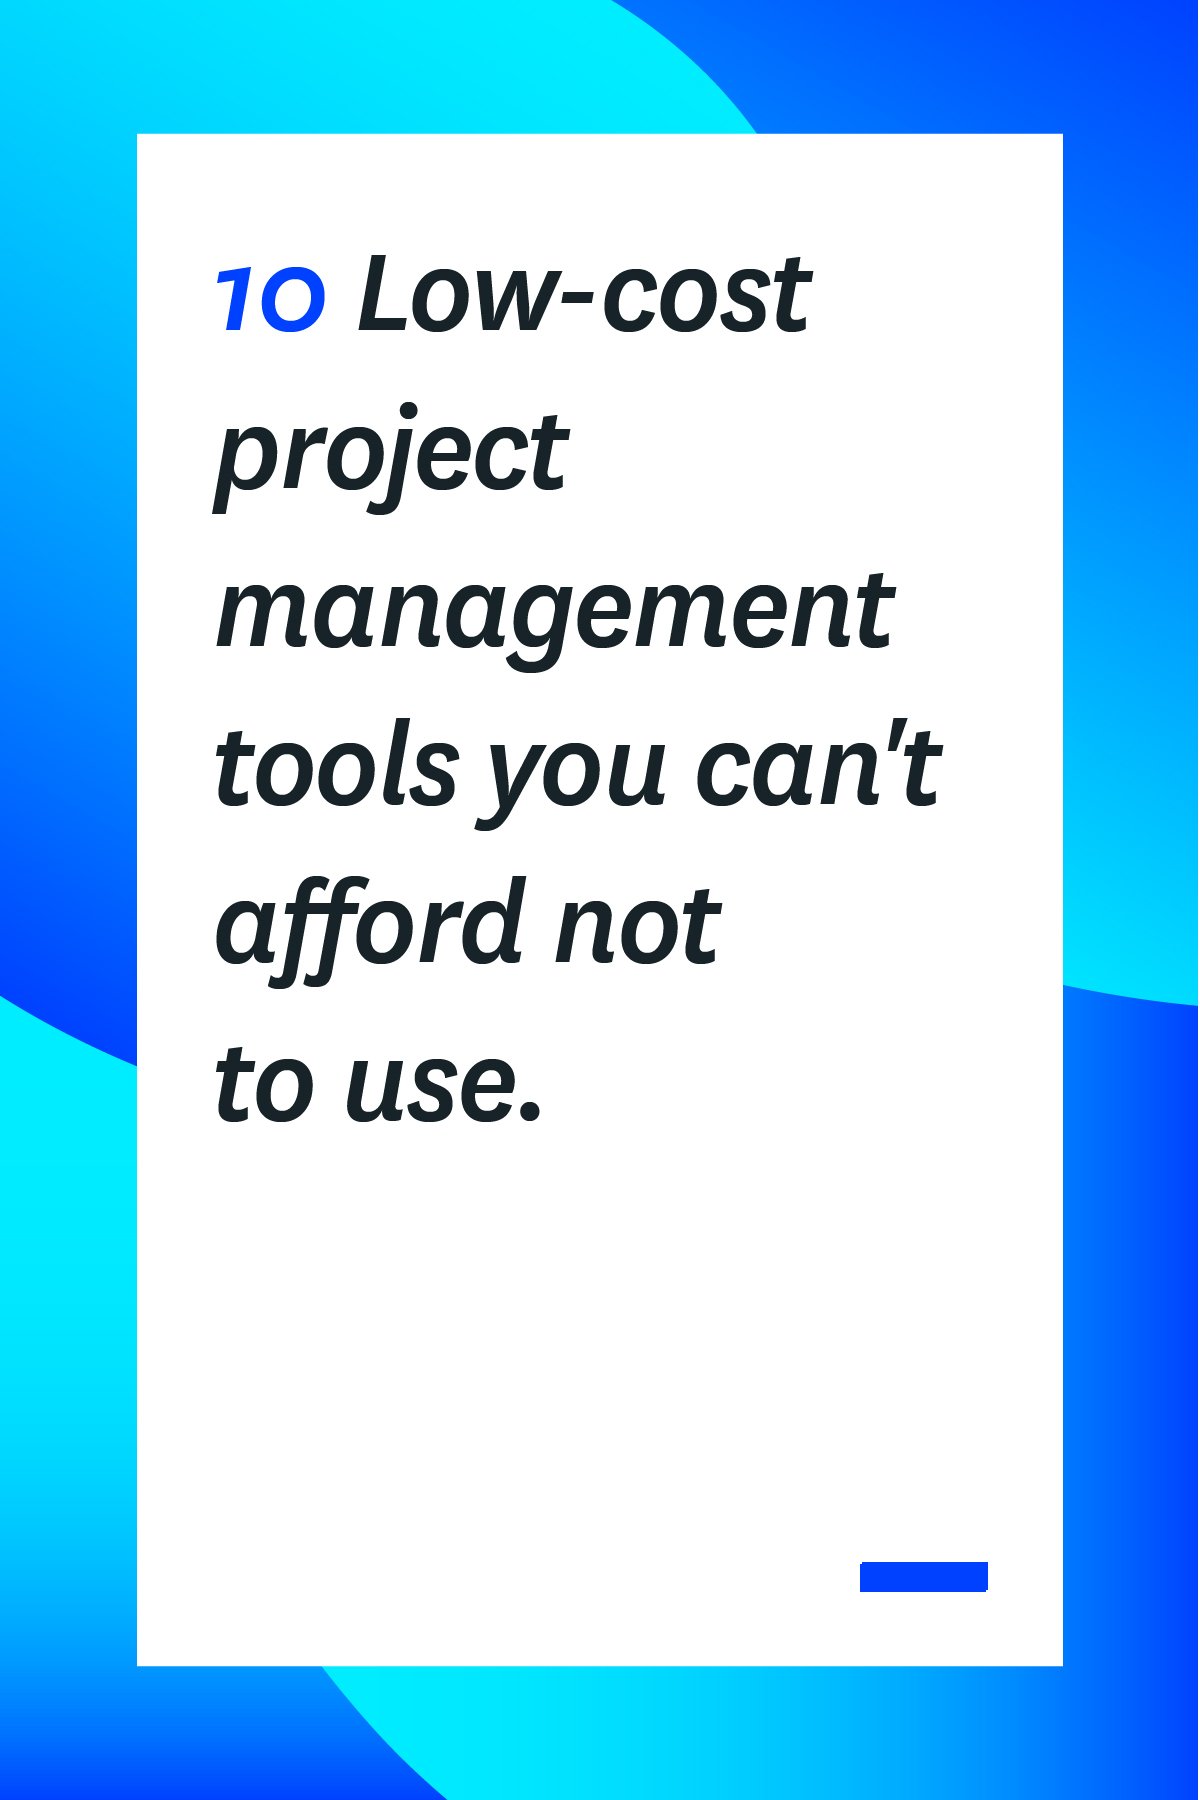 If you want to manage your projects in style, but without breaking the budget, check out this review of 10 low-cost project management tools.